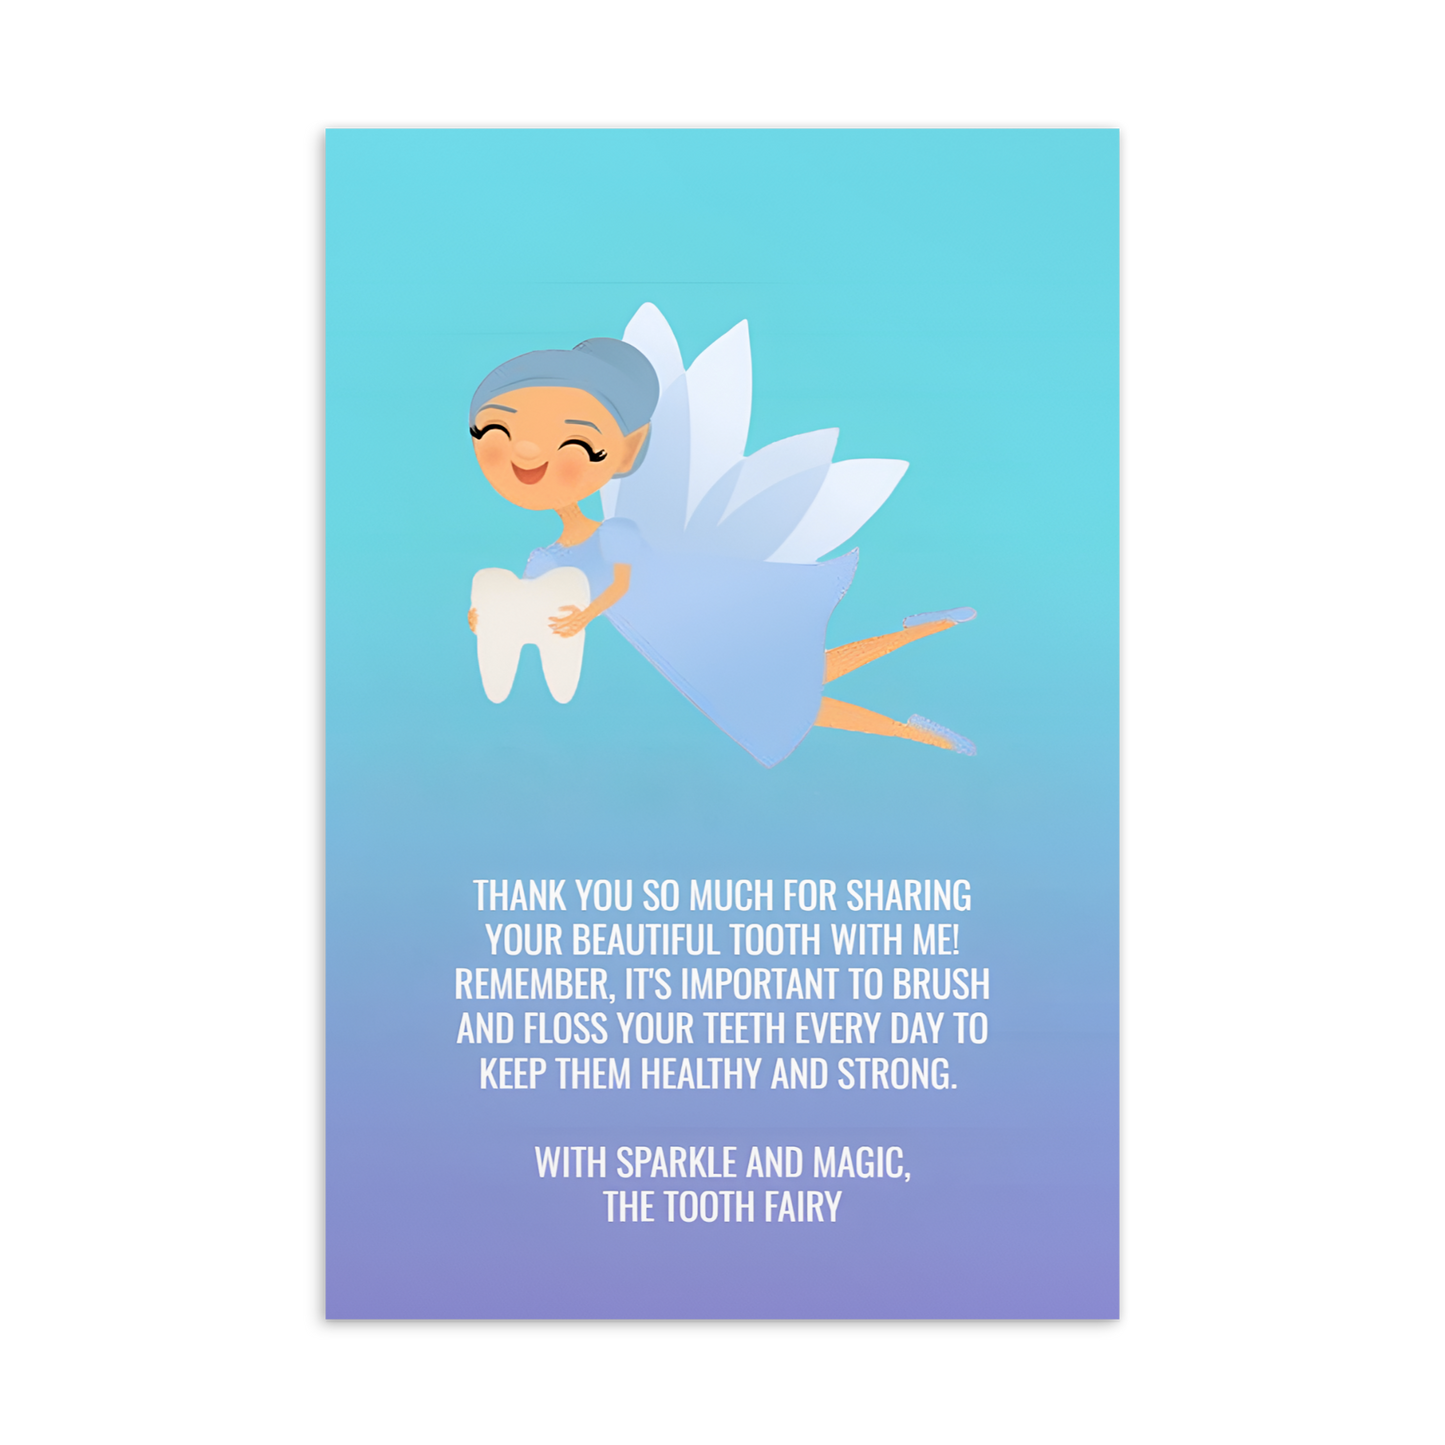 Tooth Fairy Thank You Cards-  Thank You So Much For Sharing Your Beautiful Tooth With Me!